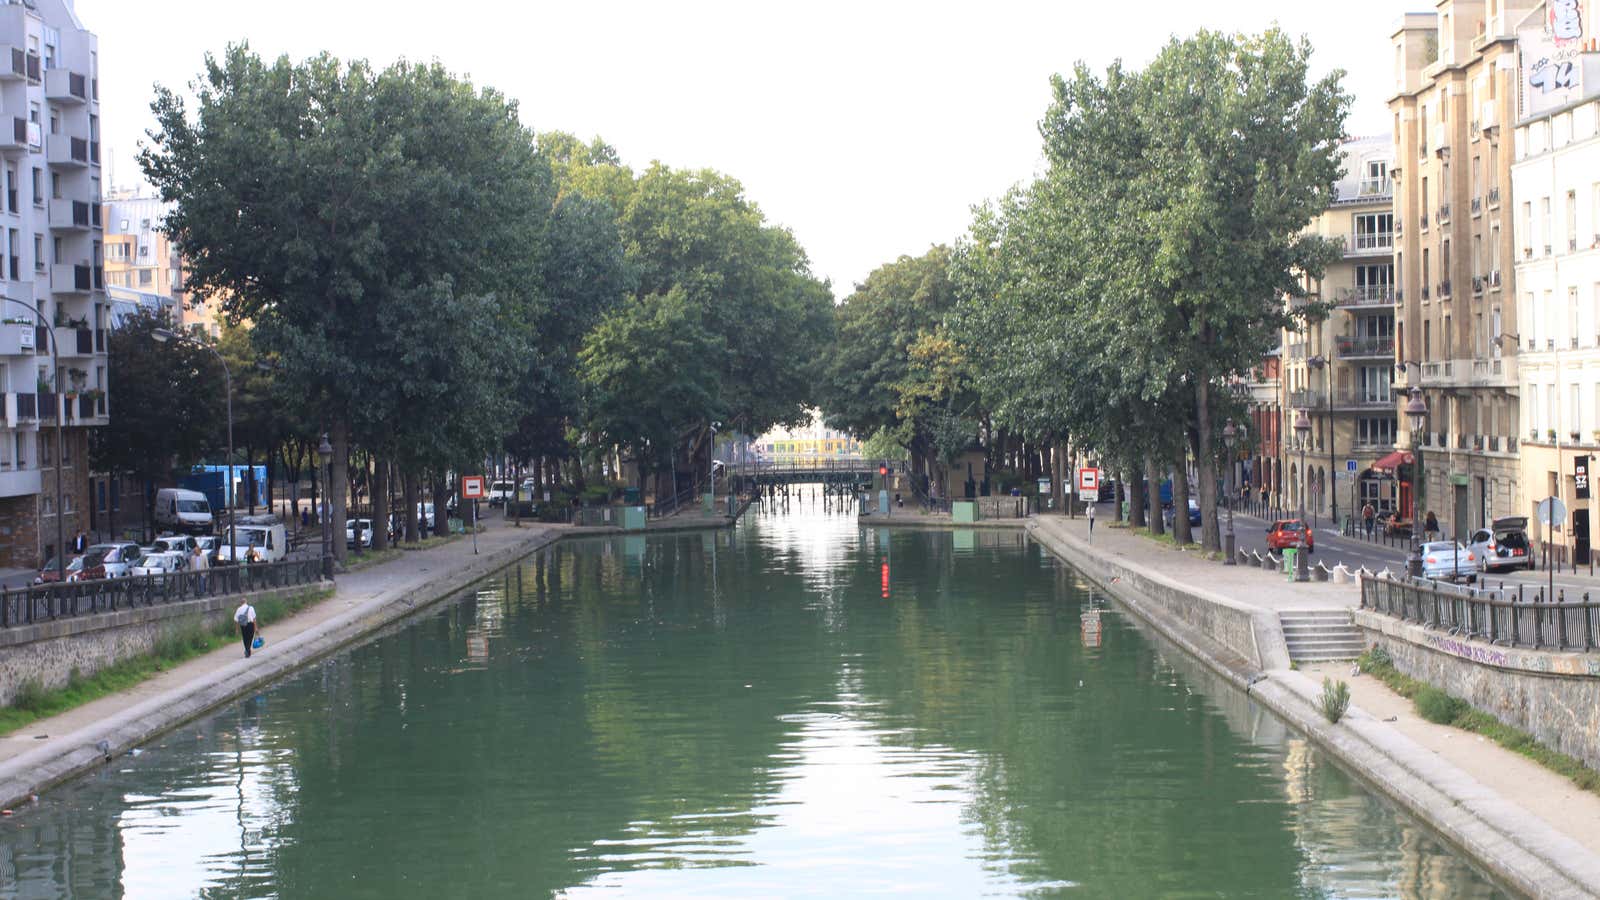 Canal Saint Martin at a more peaceful time.